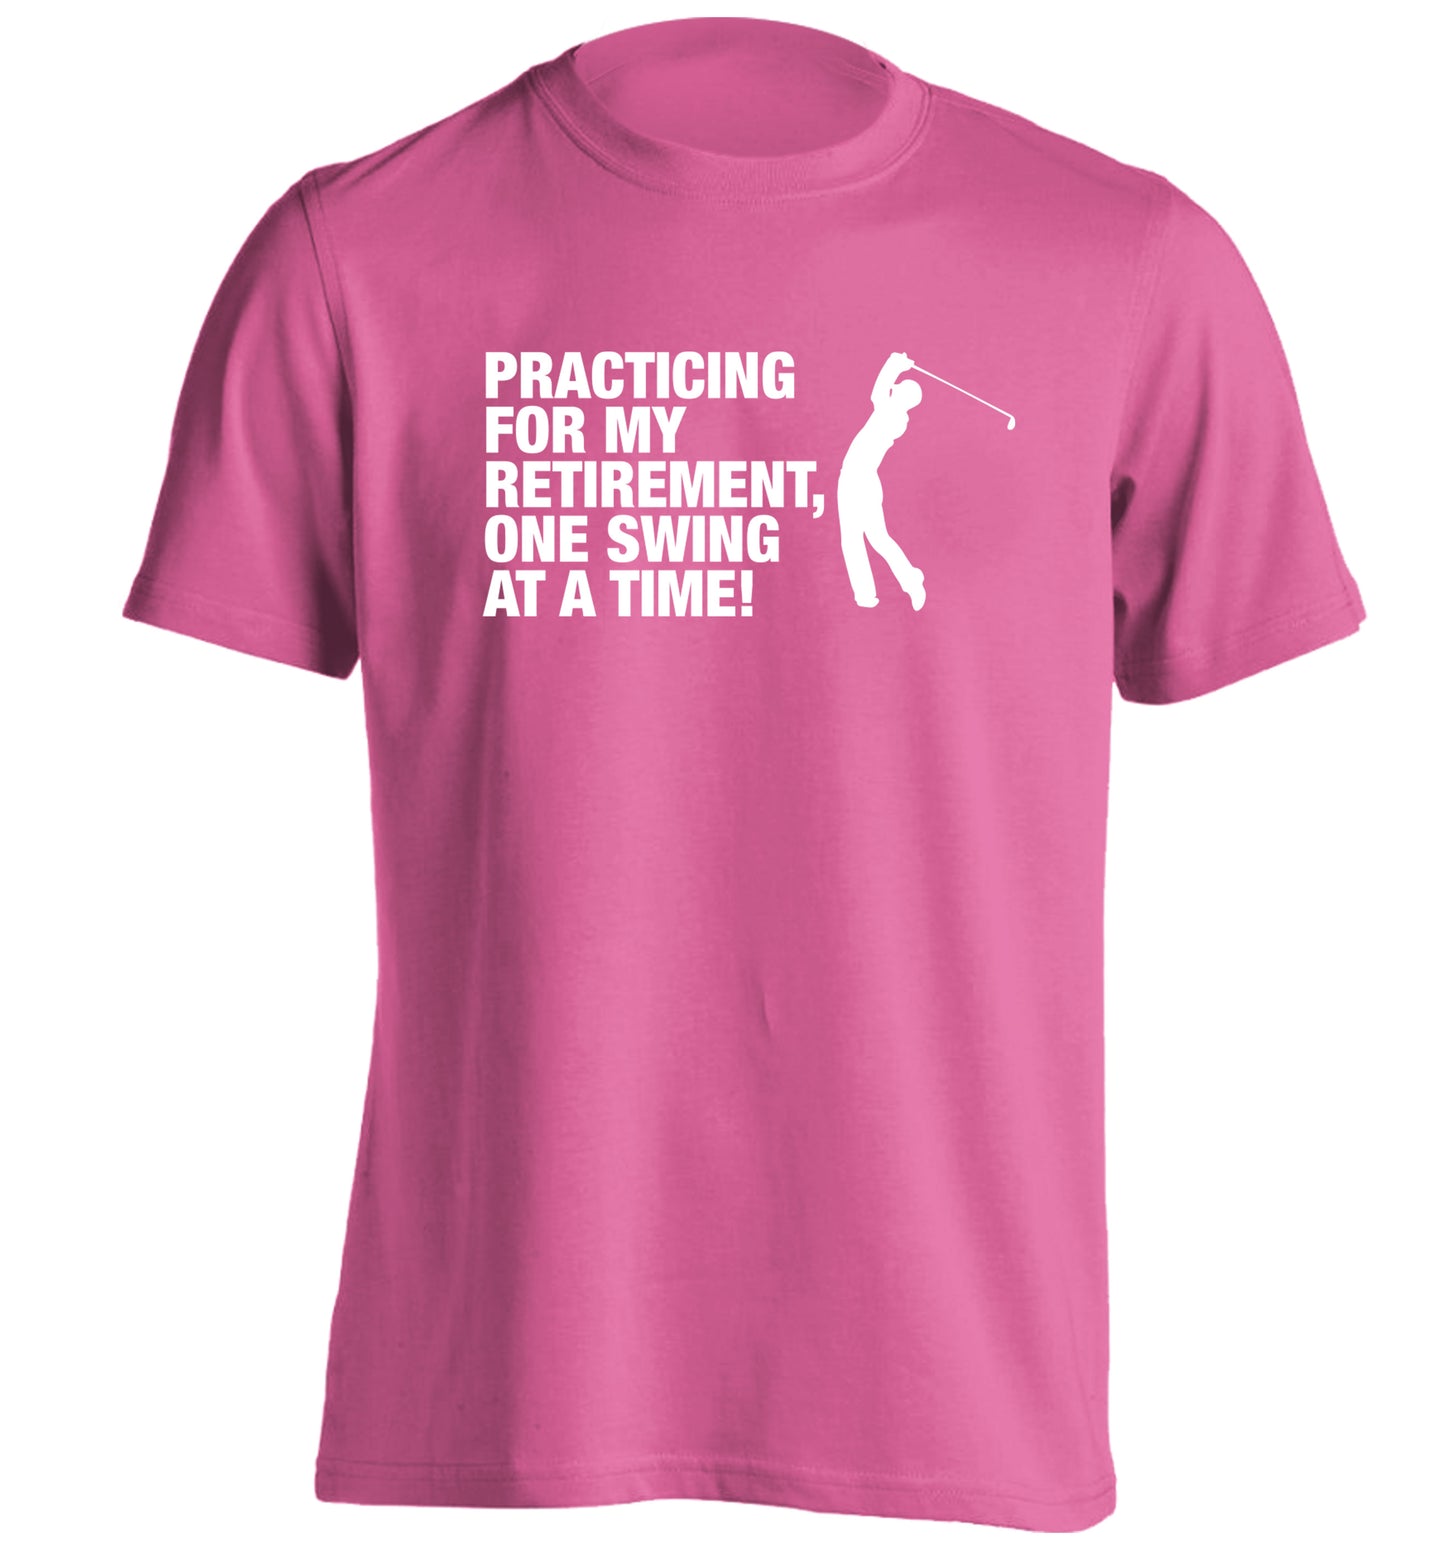 Practicing for my retirement one swing at a time adults unisex pink Tshirt 2XL